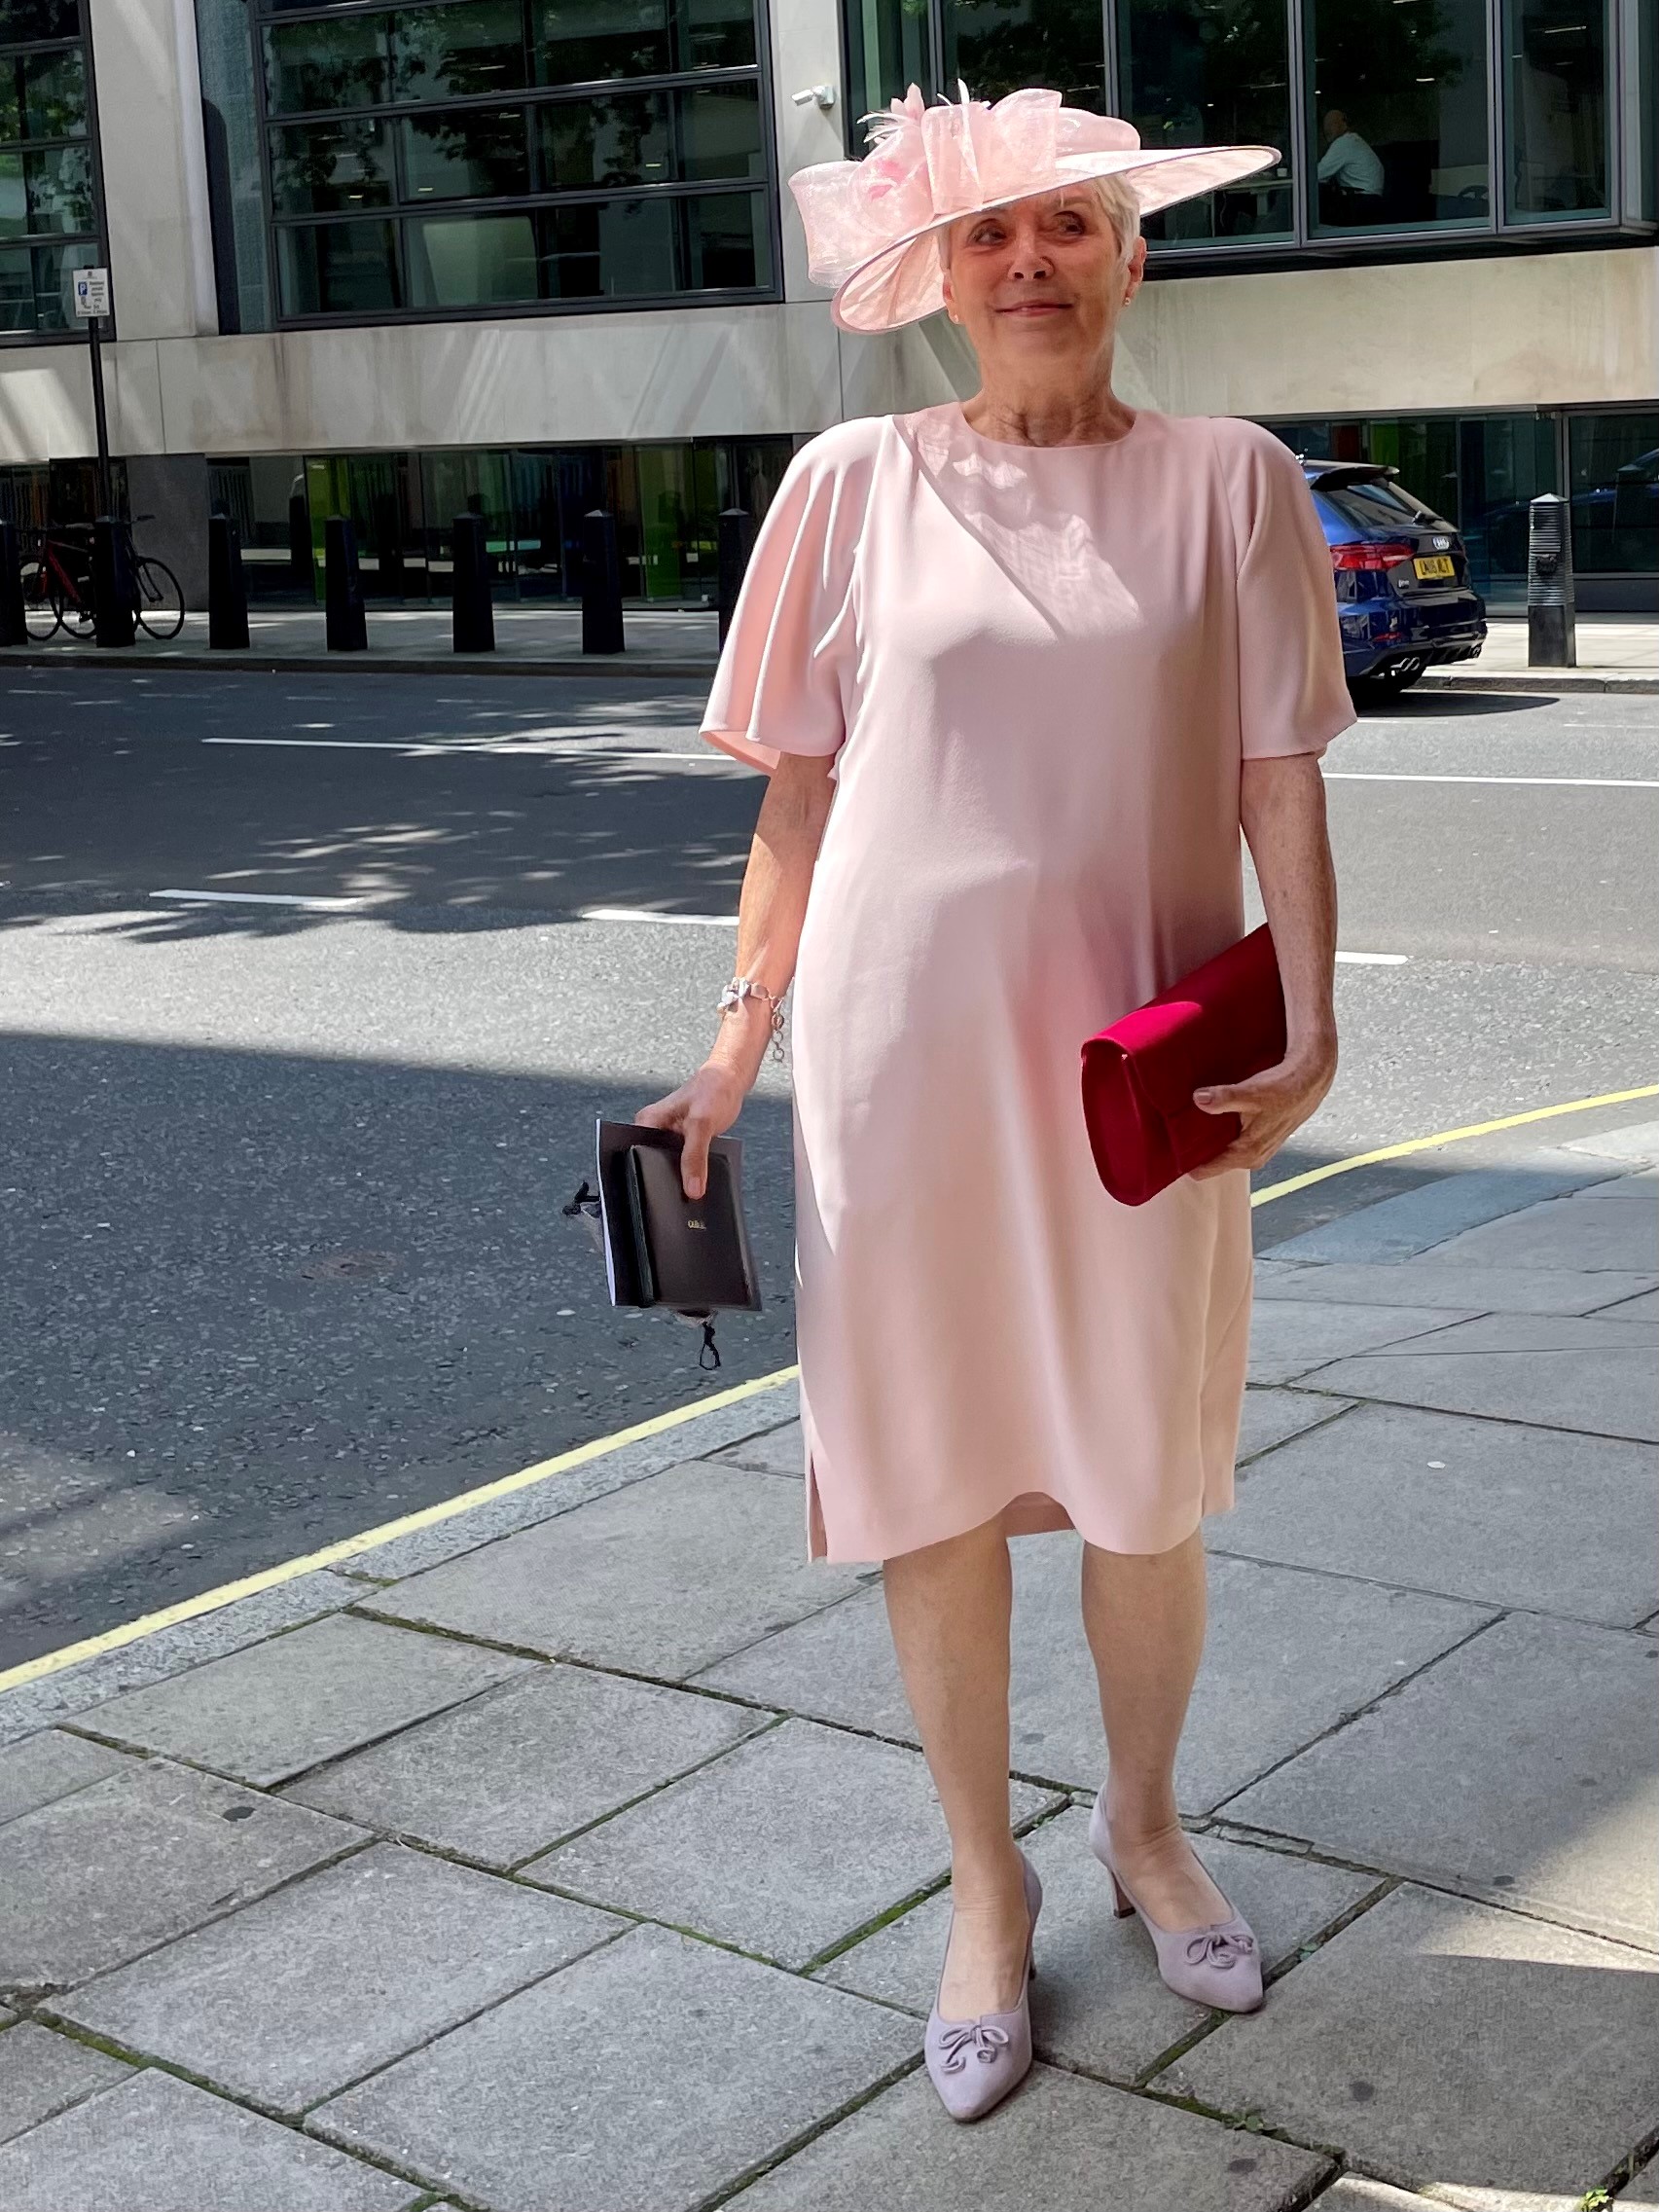 Mirella Bartrip OBE smiling in pink dress and hat with red clutch bag